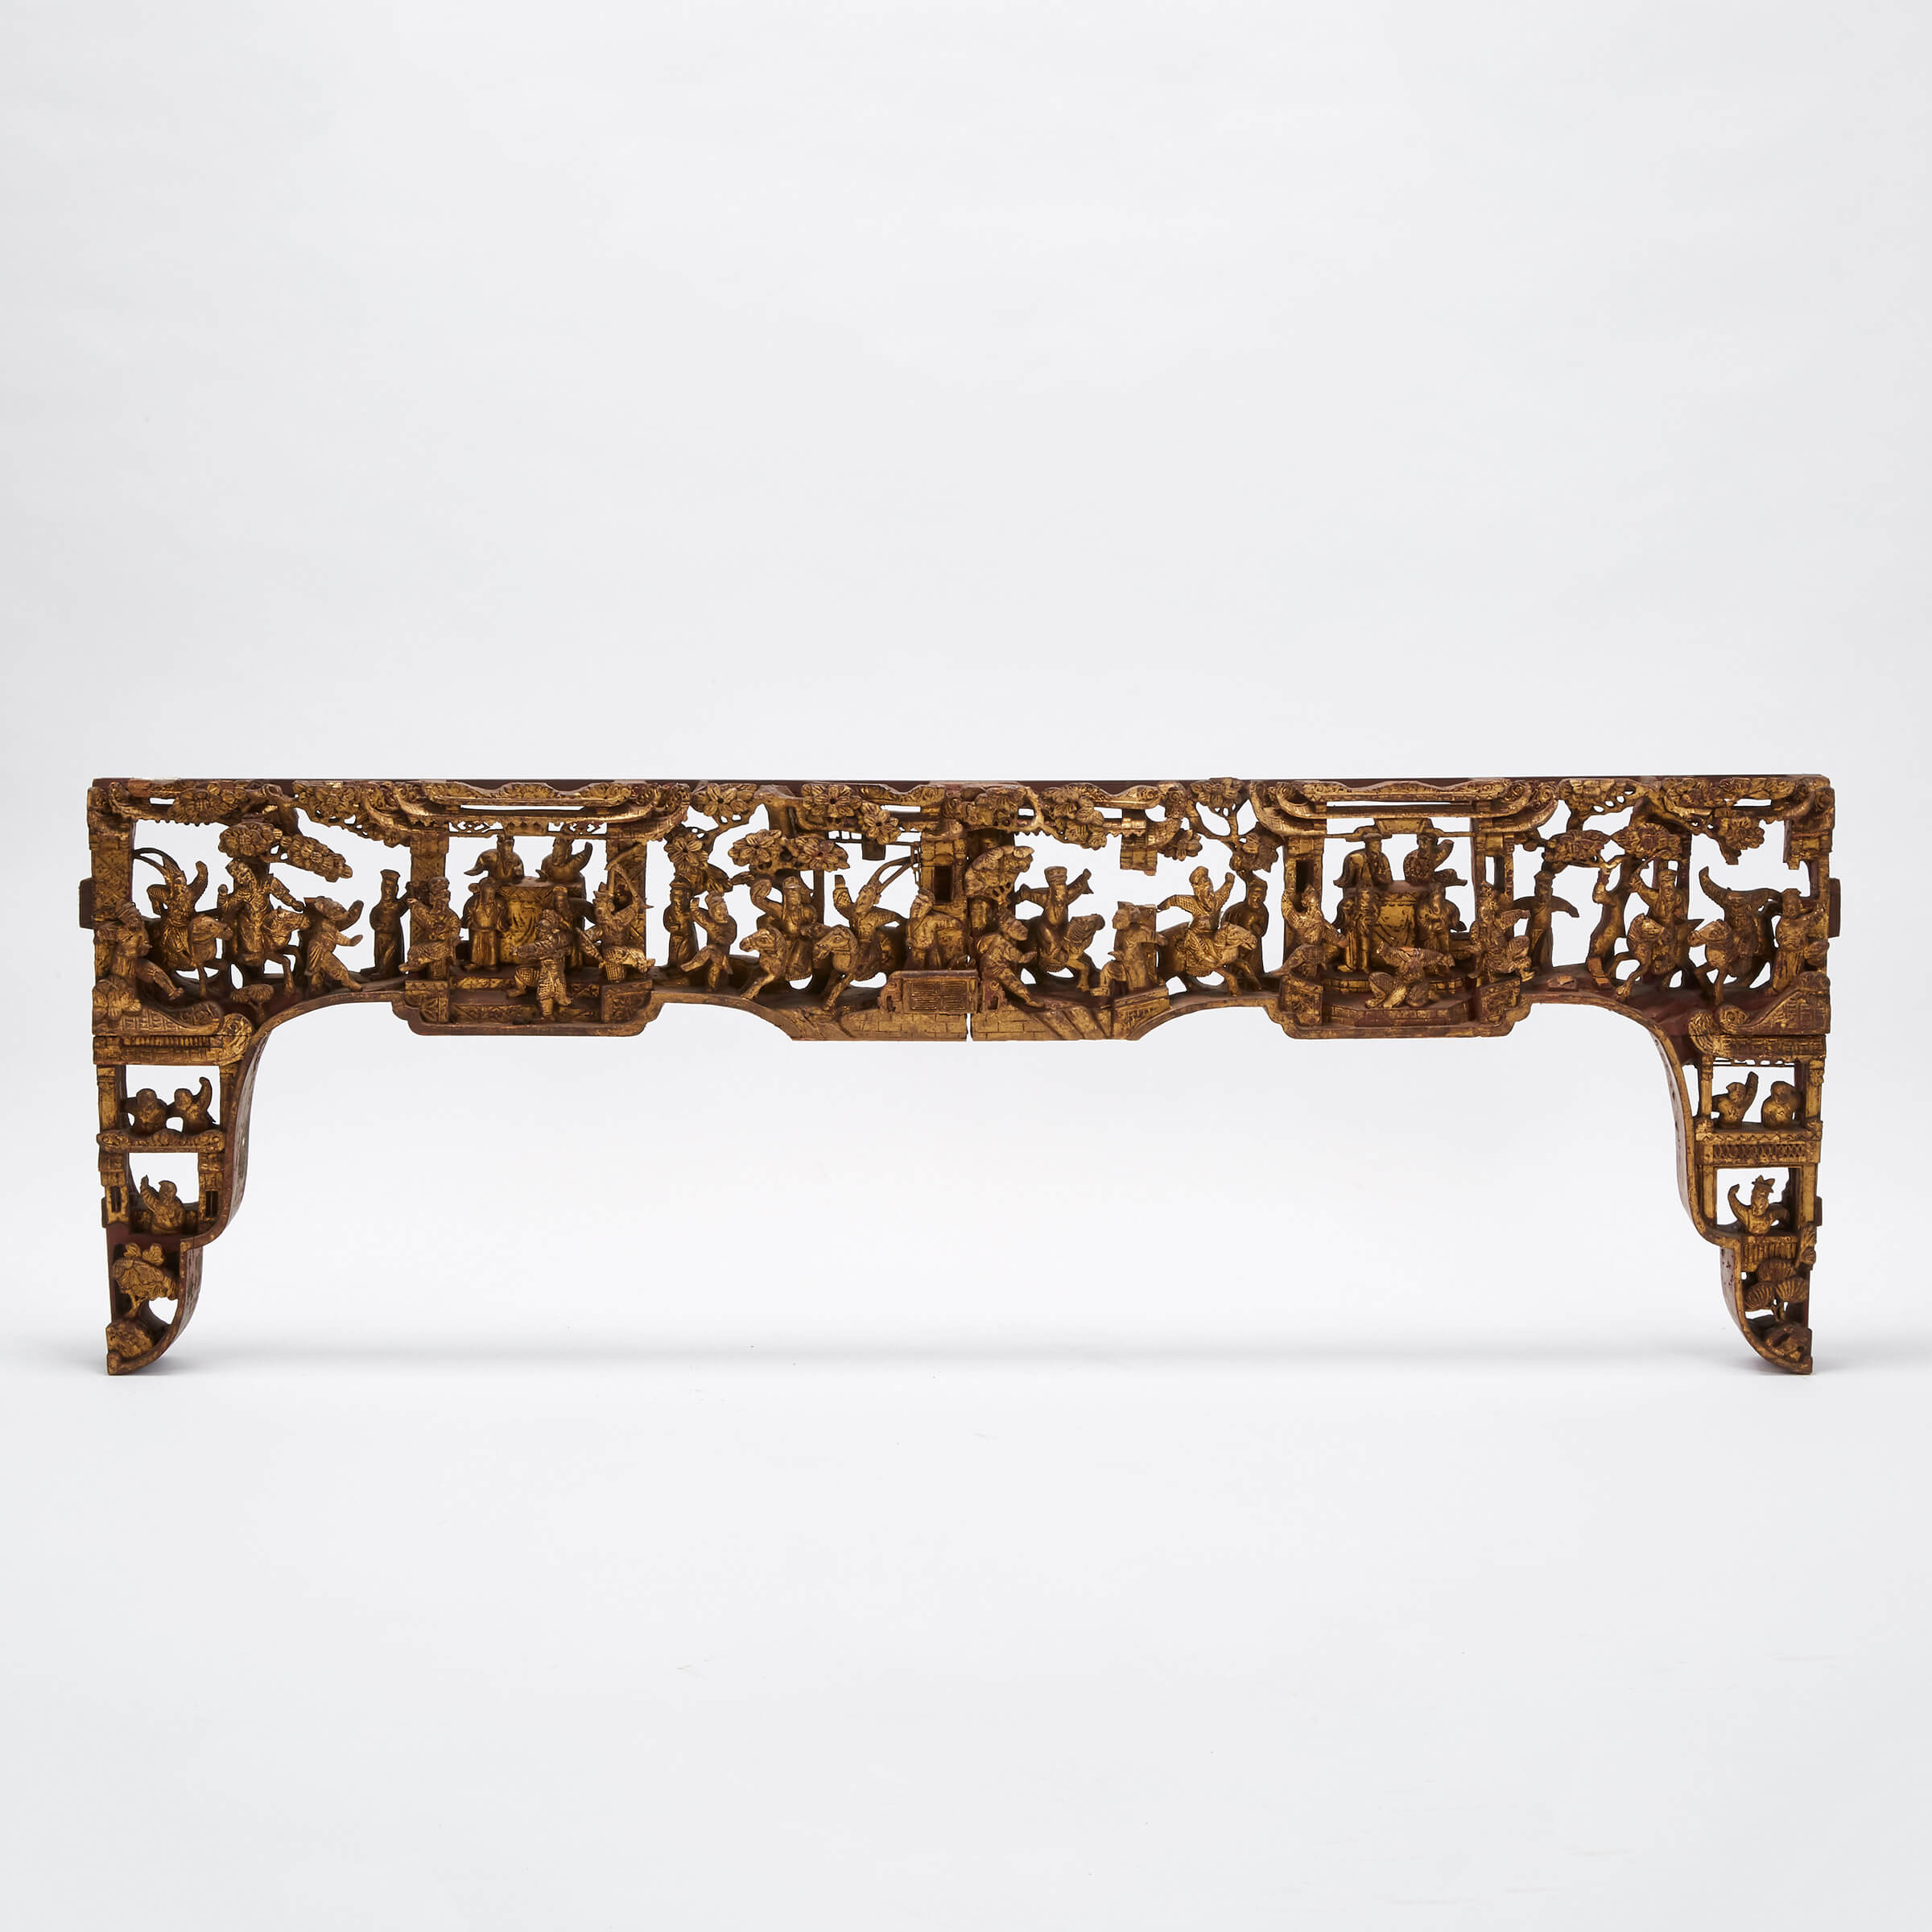 A Large Gilt Wood Carved Architectural Component, 19th Century